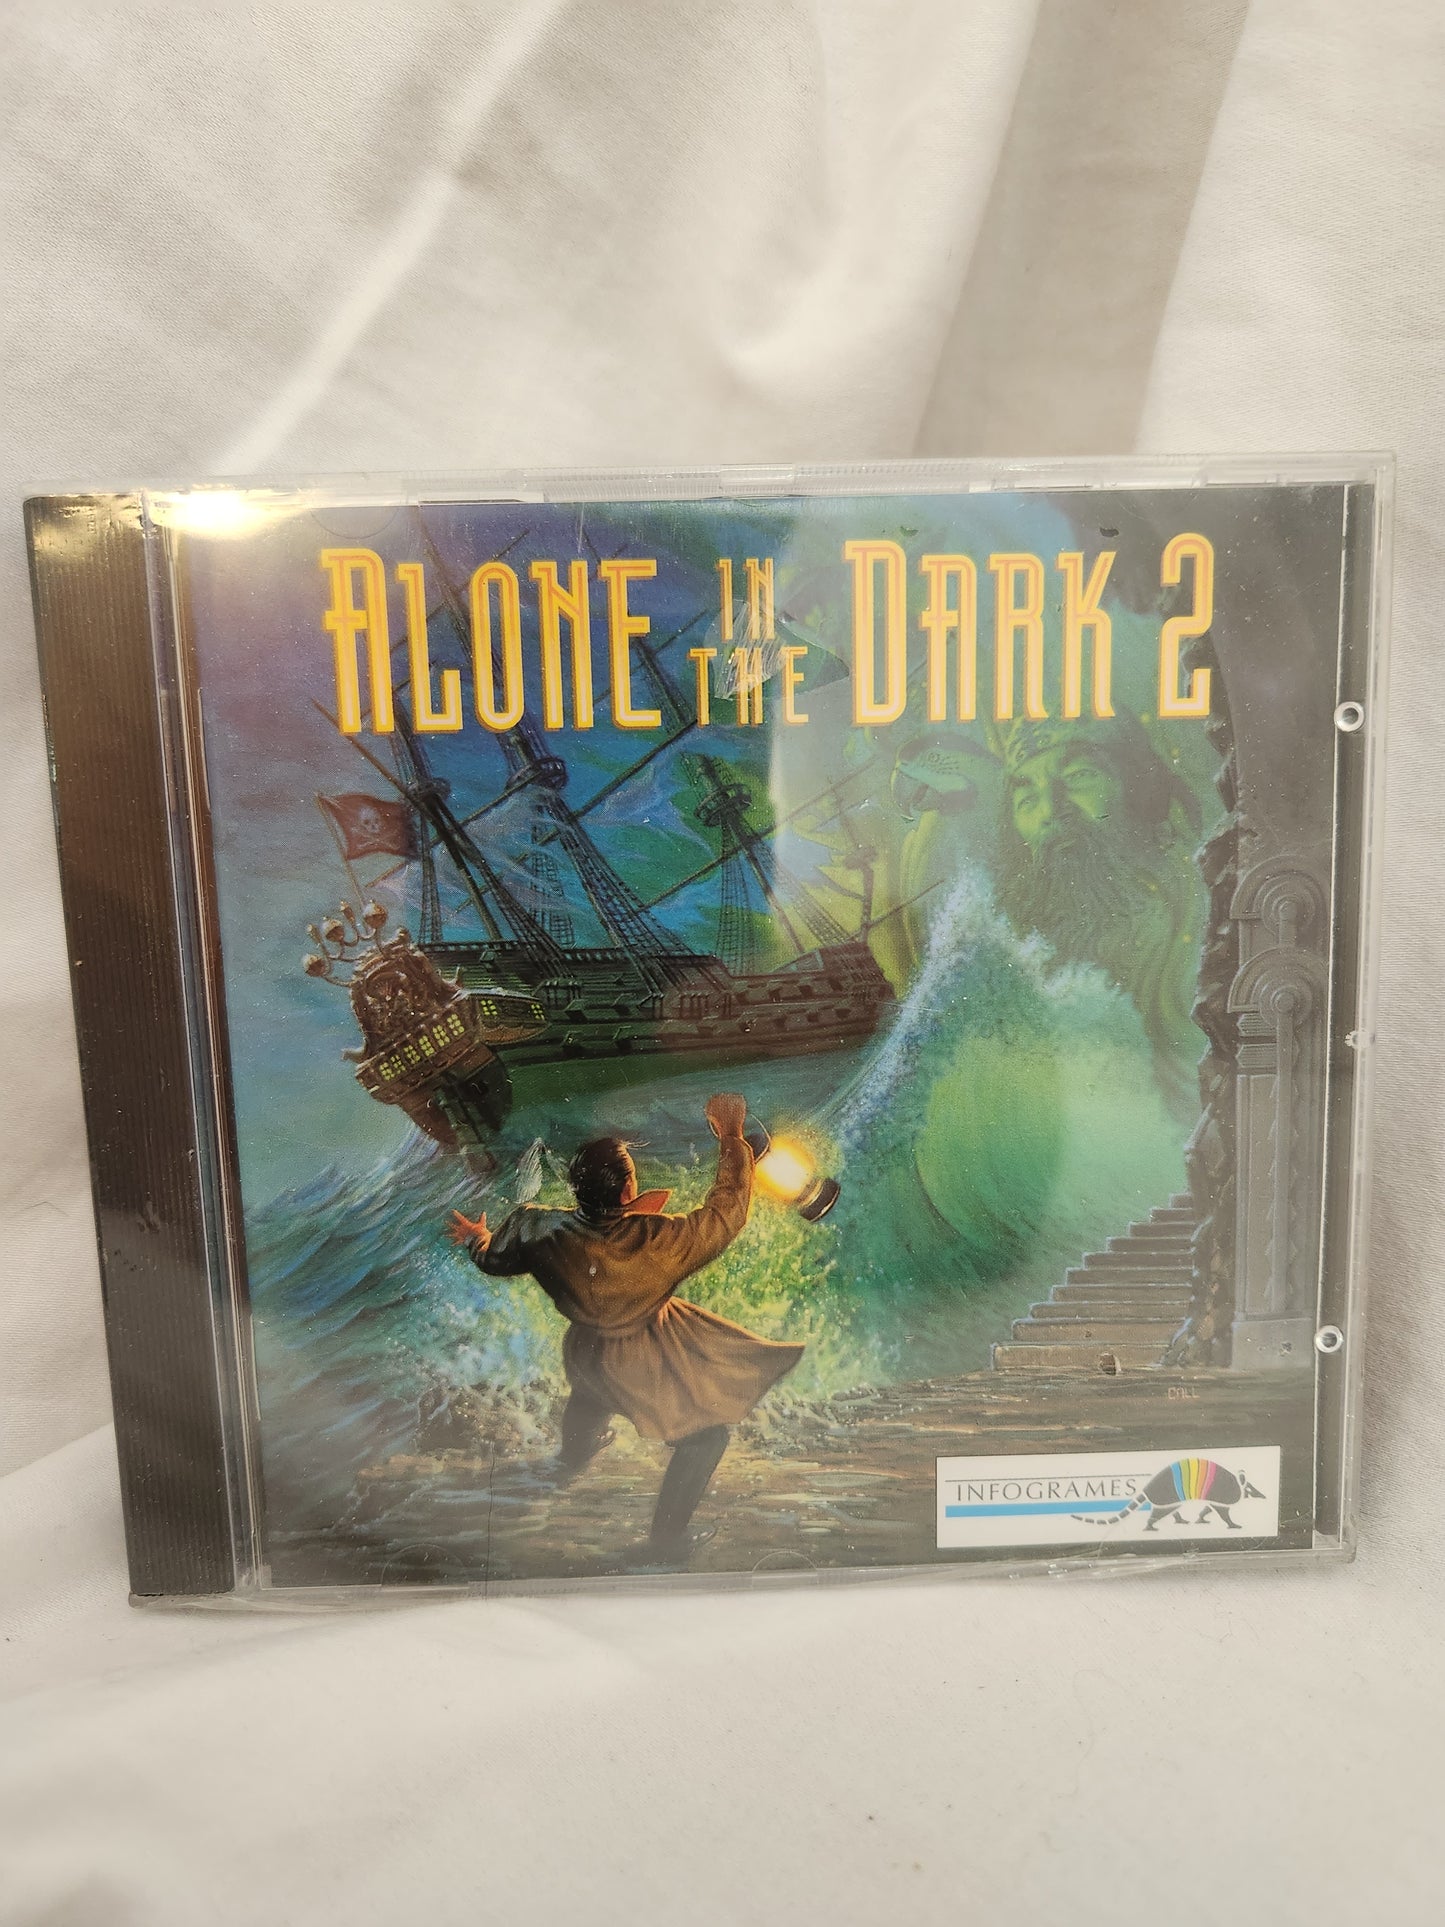 1995 Alone in the Dark-2 PC CD-ROM Game by Infogrames